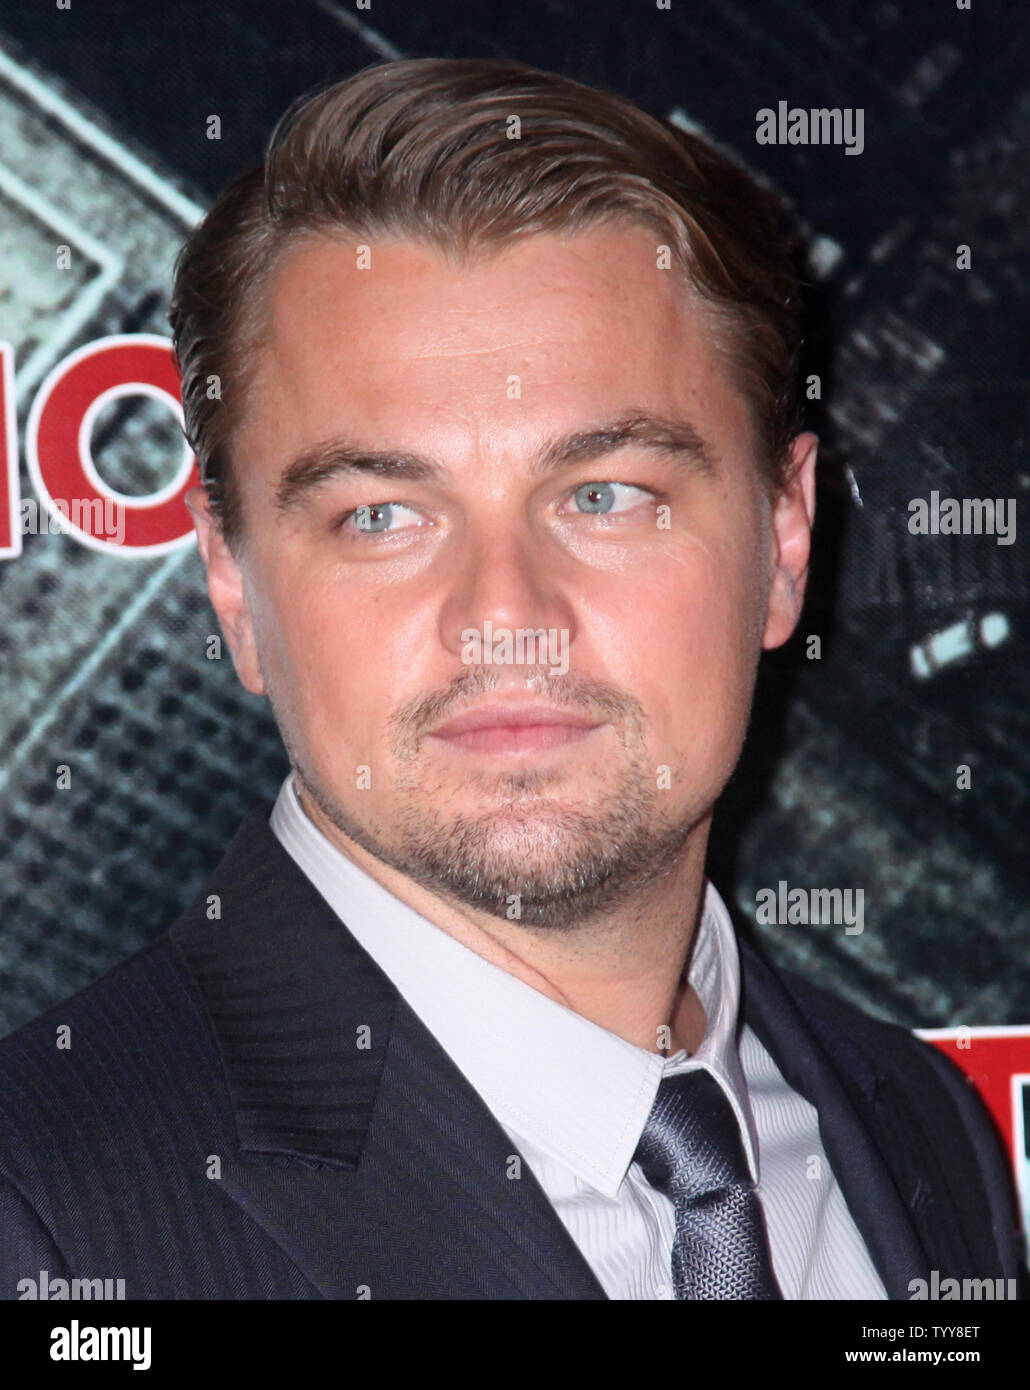 Leonardo Di Caprio arrives at the French premiere of the film 'Inception' in Paris on July 10, 2010.     UPI/David Stock Photo